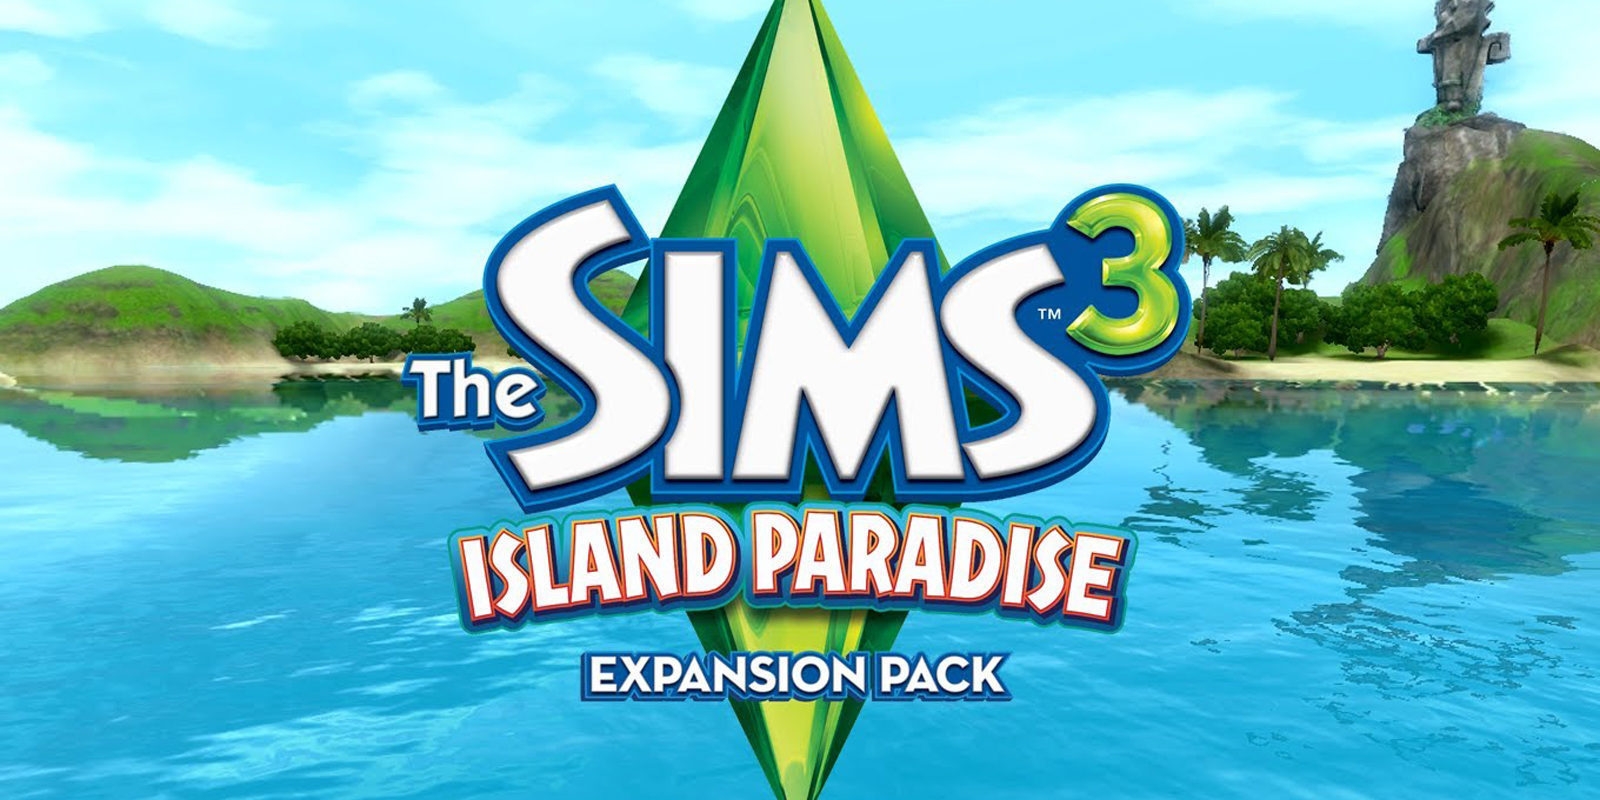 sims 3 island paradise for wii